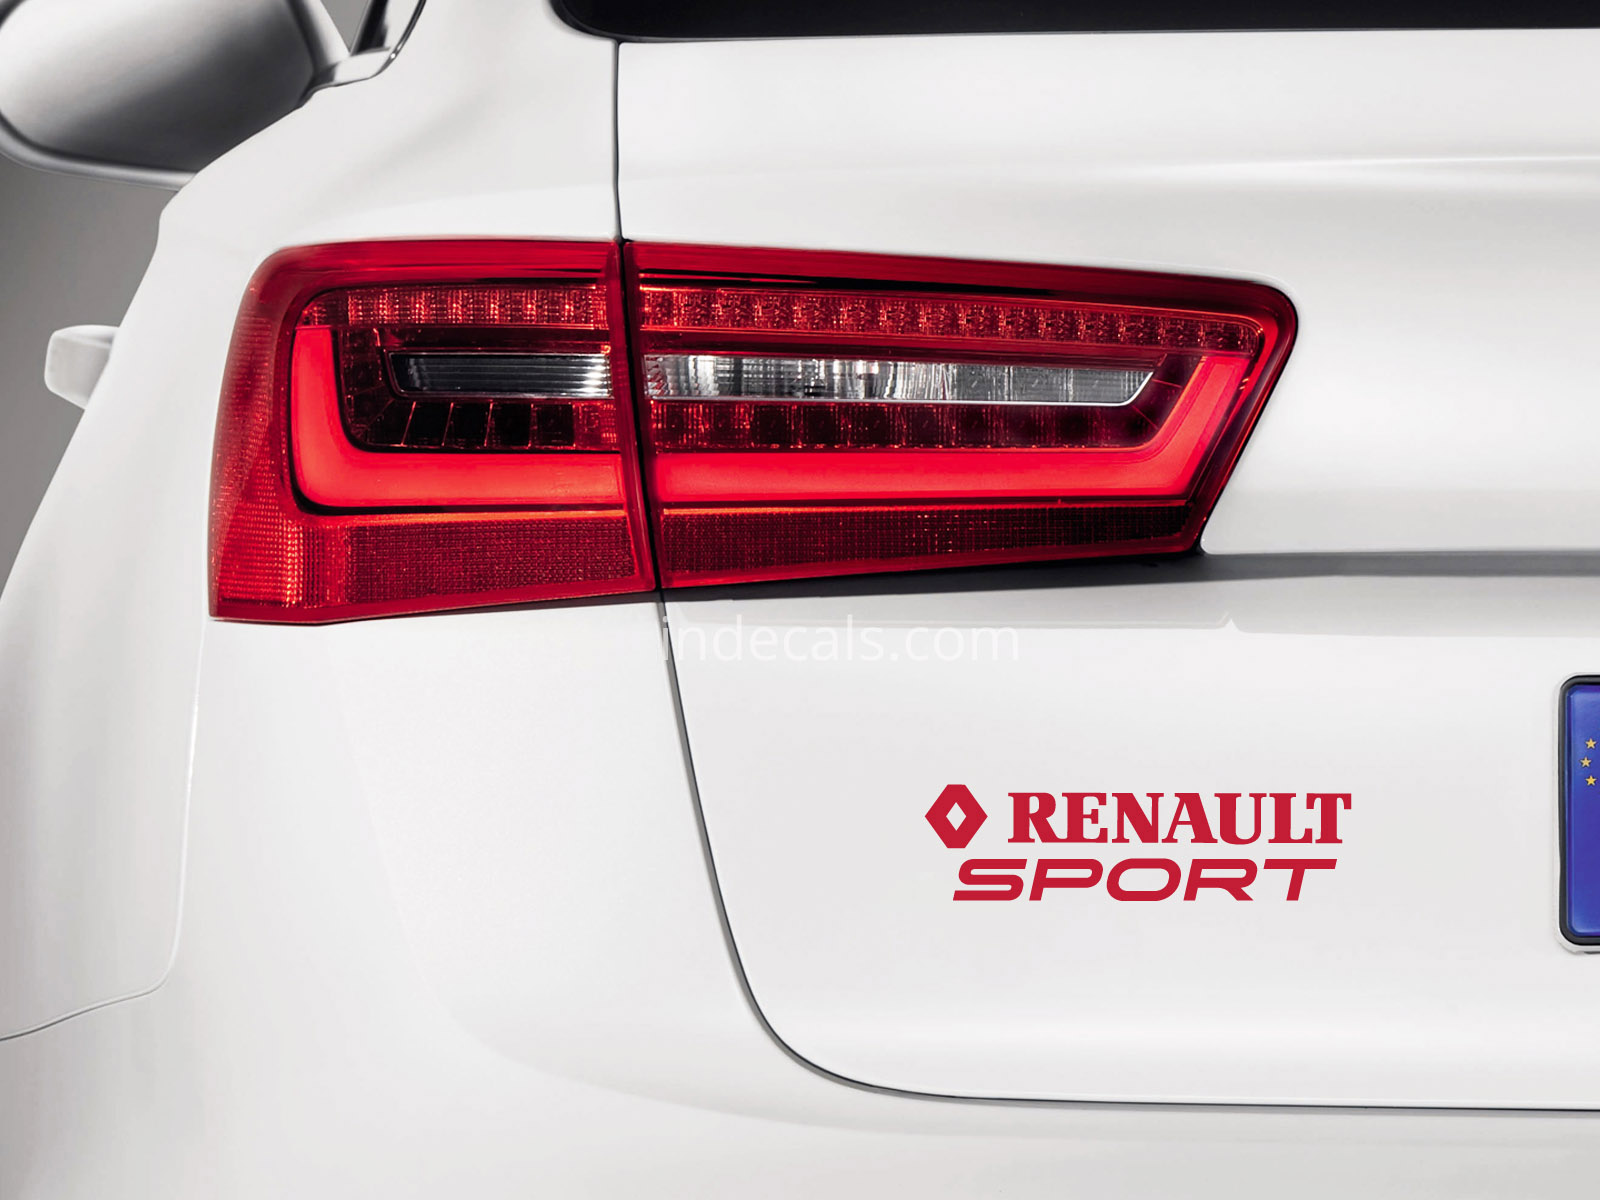 1 x Renault Sports Sticker for Trunk - Red